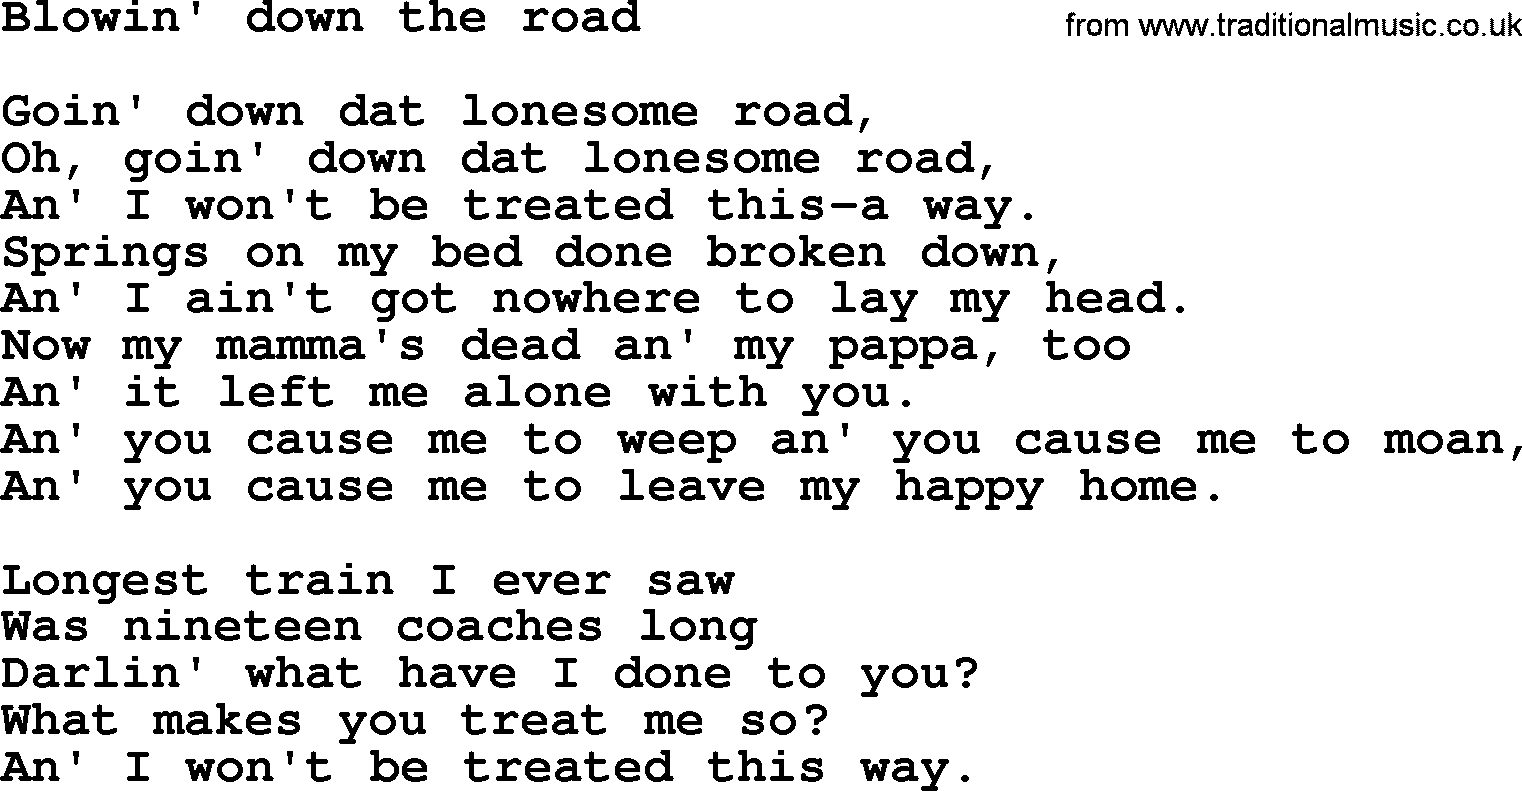 Bruce Springsteen song: Blowin' Down The Road lyrics